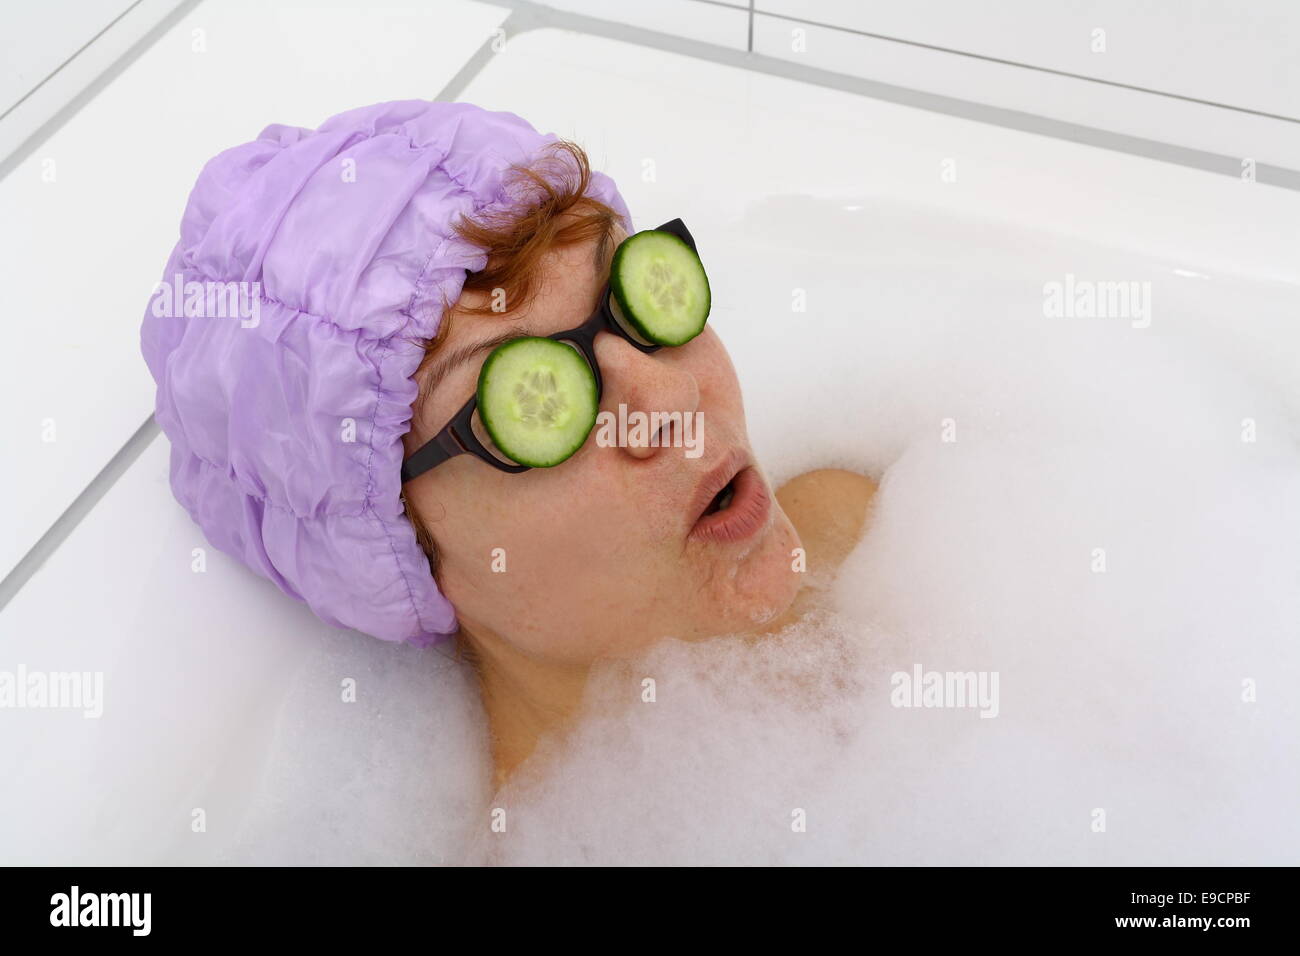 Mature woman in bathtub with cucumber slices on glasses, spa Stock Photo